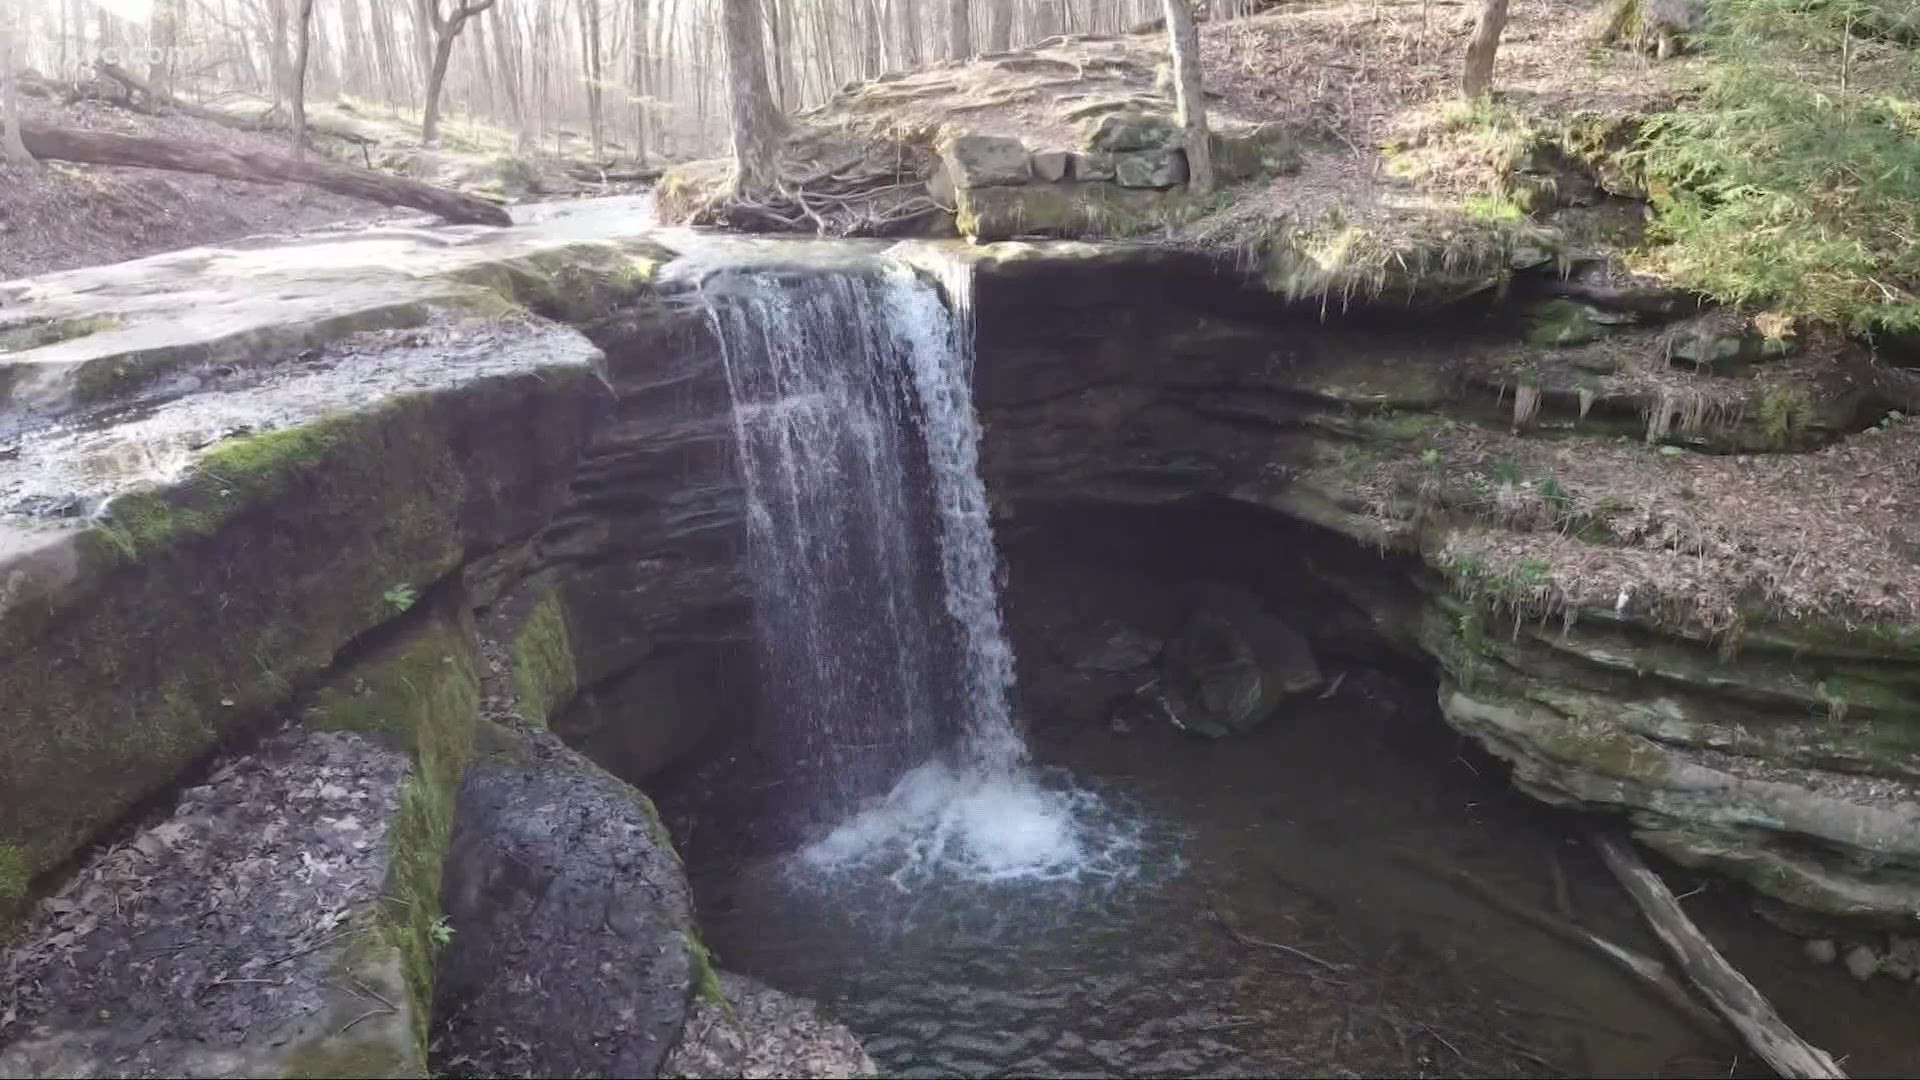 Grab your hiking boots because spring is waterfall season in Ohio!